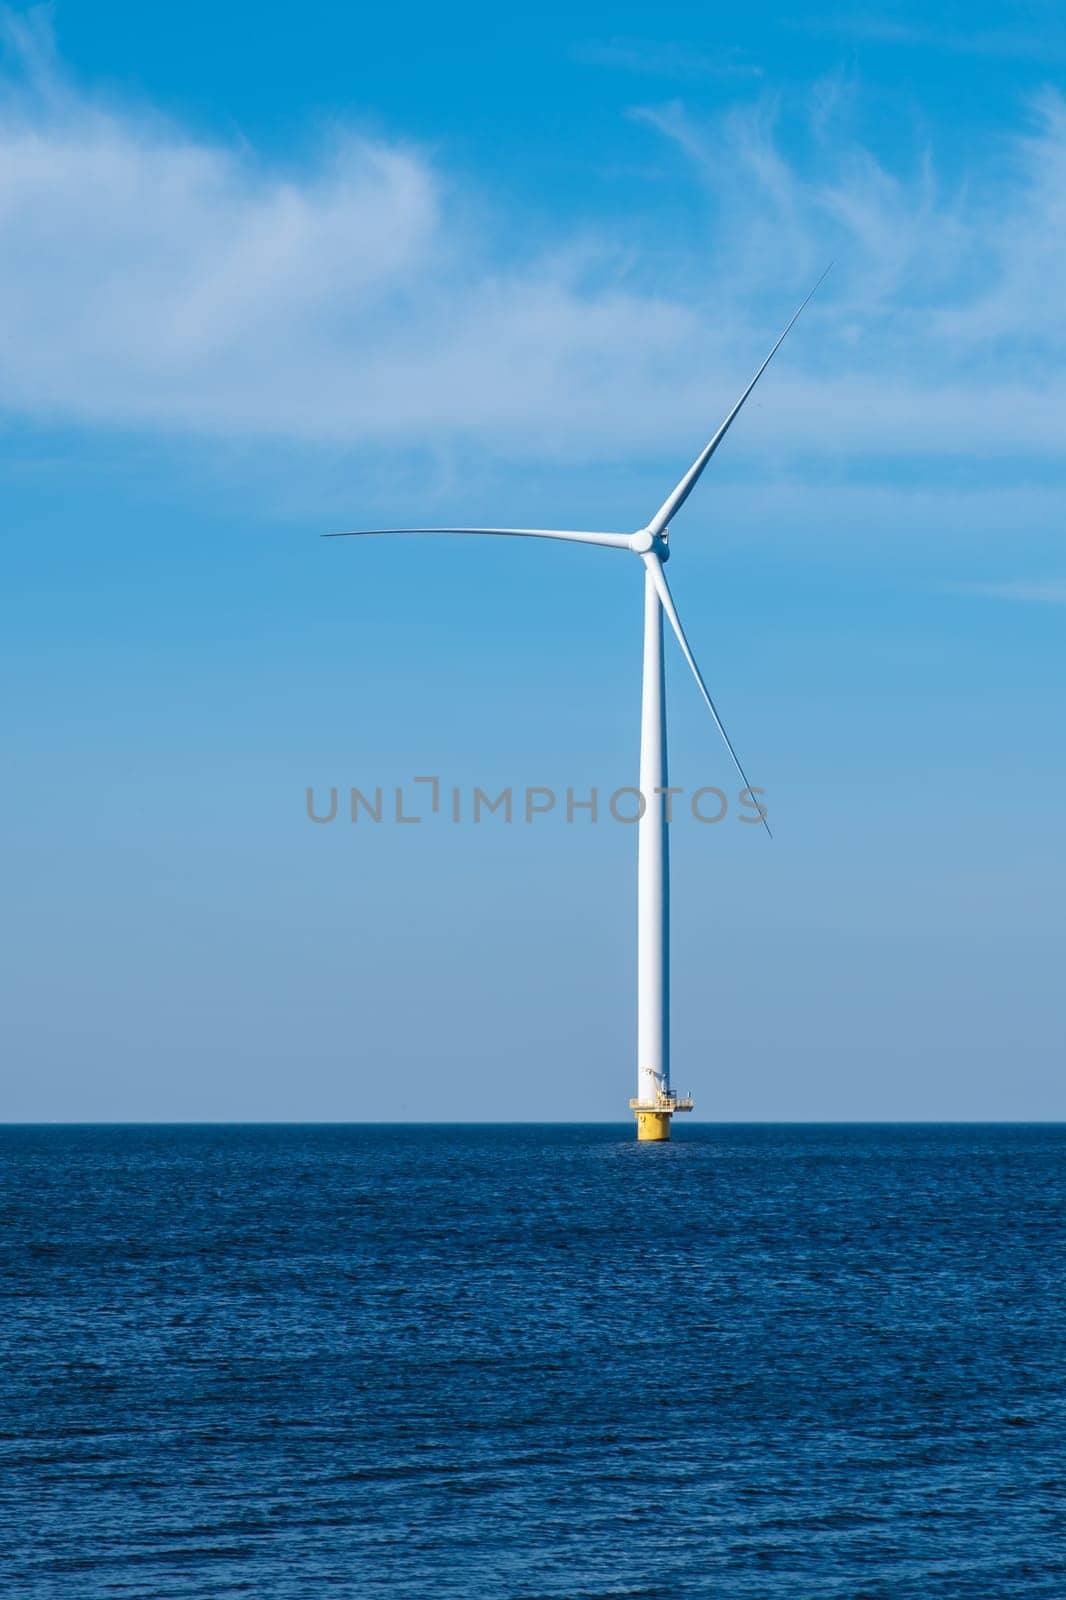 A solitary wind turbine stands tall in the vast ocean, harnessing the power of the wind to generate clean energy for a sustainable future. Windmill turbines at sea, green energy transition in Europe